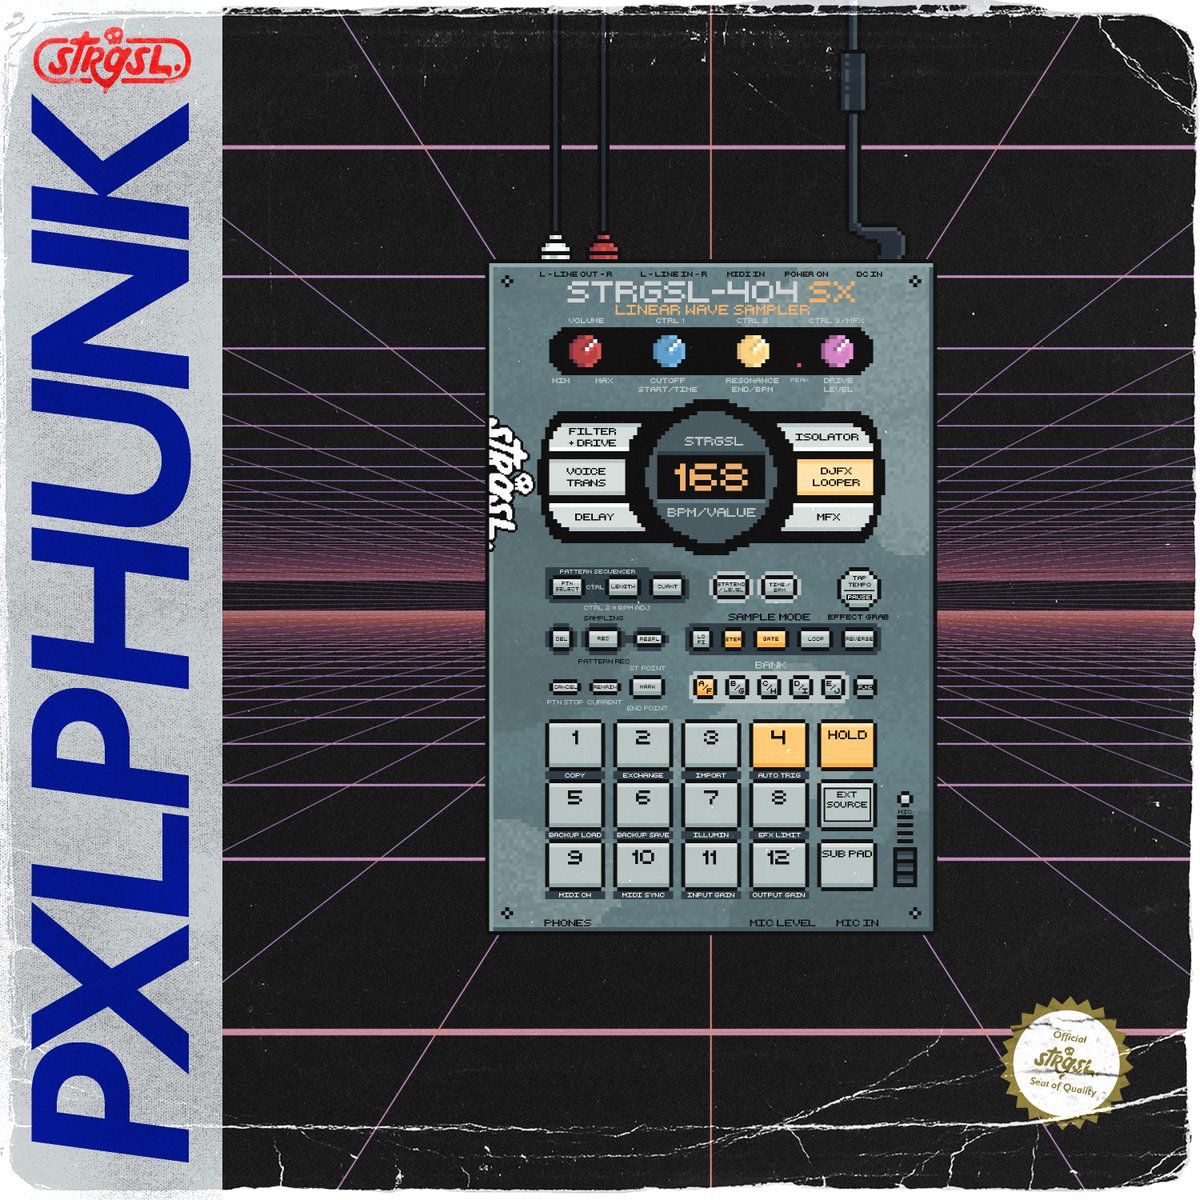 PXL Phunk EP - coming sooner than a new Mario Karts (watch Nintendo prove me wrong) 😂😂

#sp404 #sp404sx #rolandsp404 #chiptune #manchestermusic